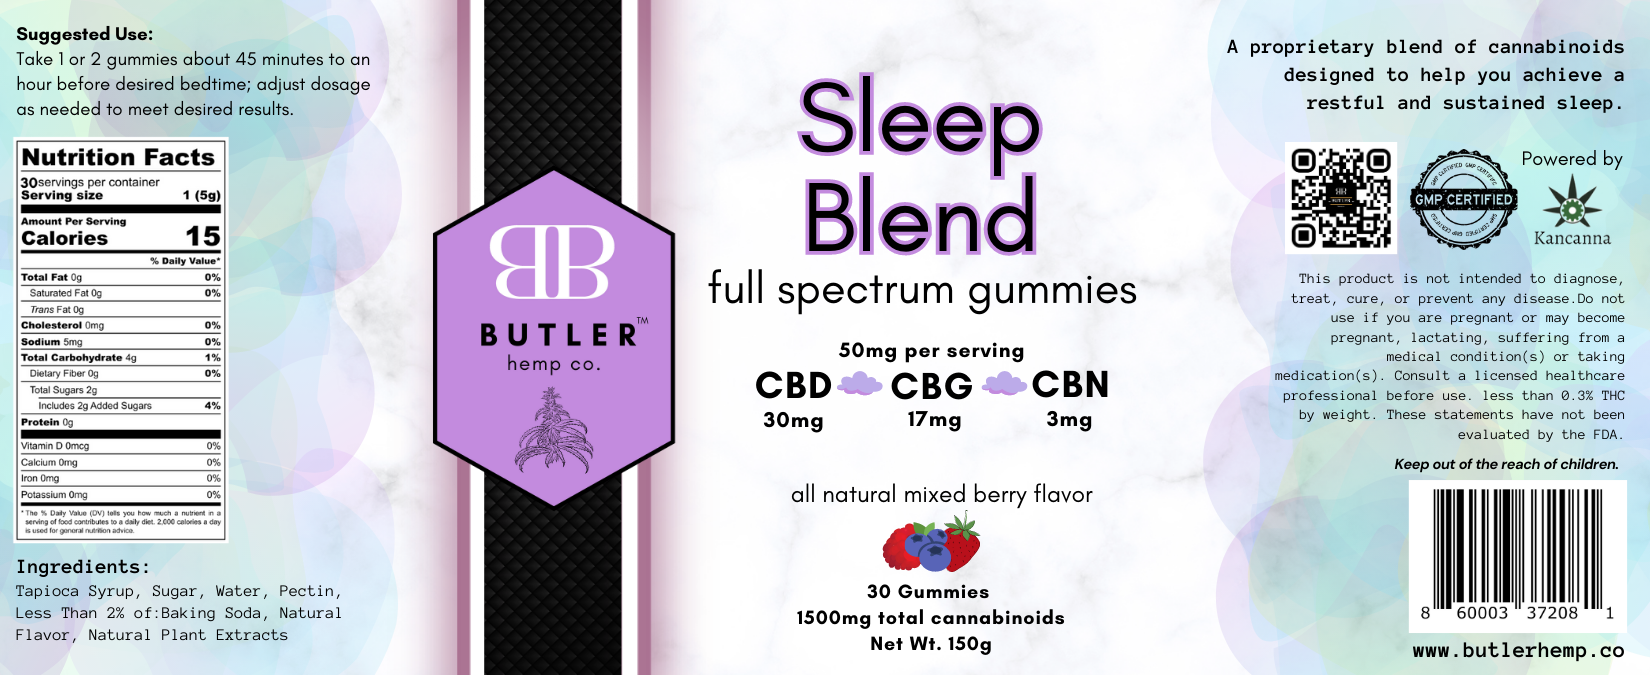 This tincture contains a special blend of cannabinoids formulated specifically to help you fall asleep, stay asleep, and wake up rested without any lingering drowsiness. We’ve combined cannabidiol (CBD), cannabigerol (CBG), and cannabinol (CBN) to achieve a perfect formula that eases tension, melts away stress, and promotes restful sleep in a gentle, natural way.